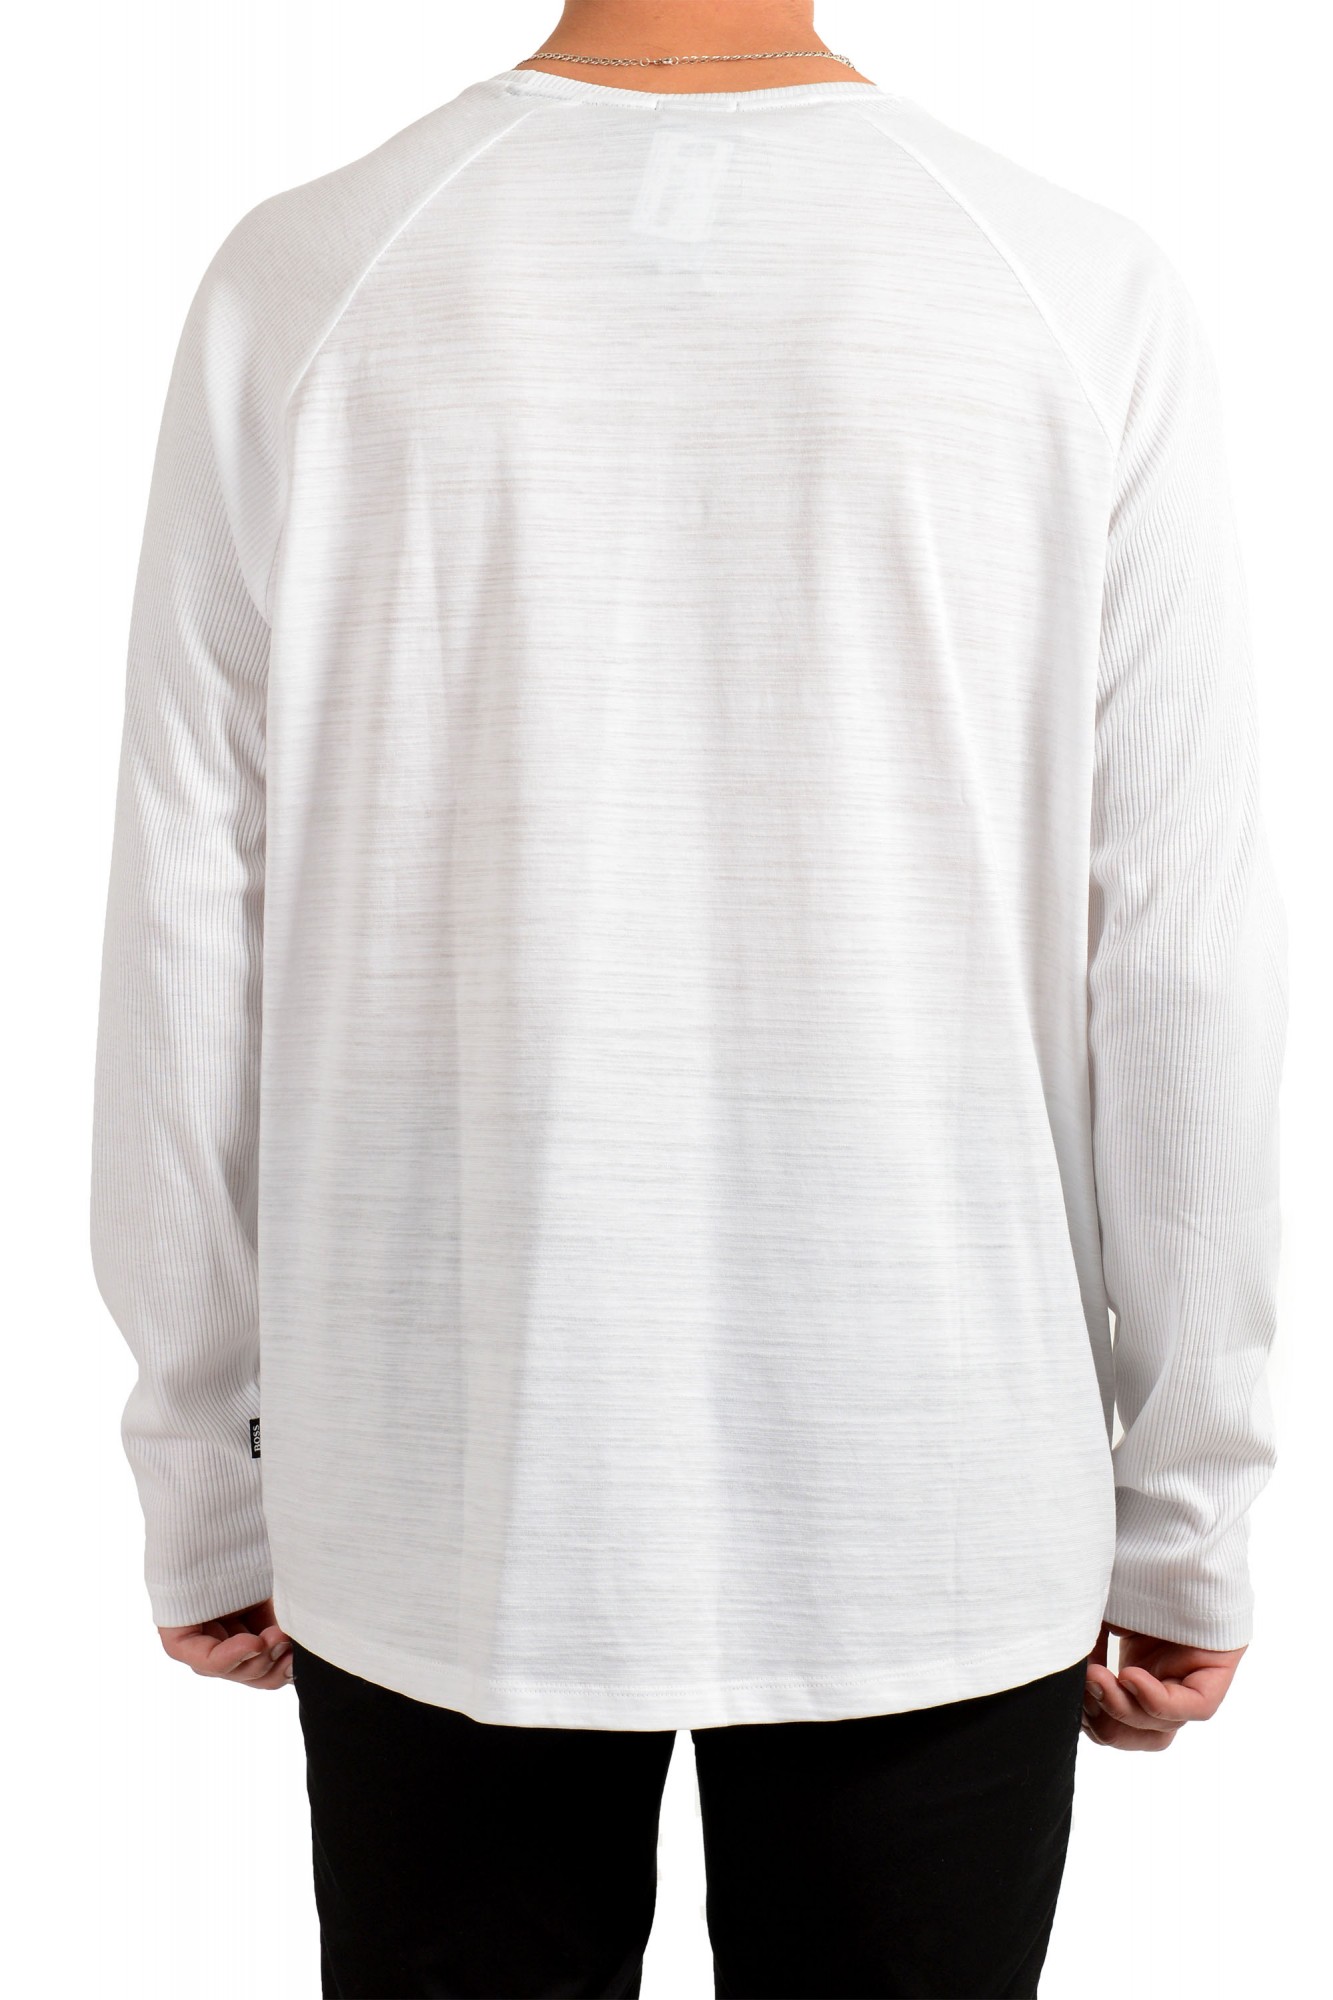 camouflage Feat To expose Hugo Boss Men's "Terell 50" White Crewneck Long Sleeve T-Shirt